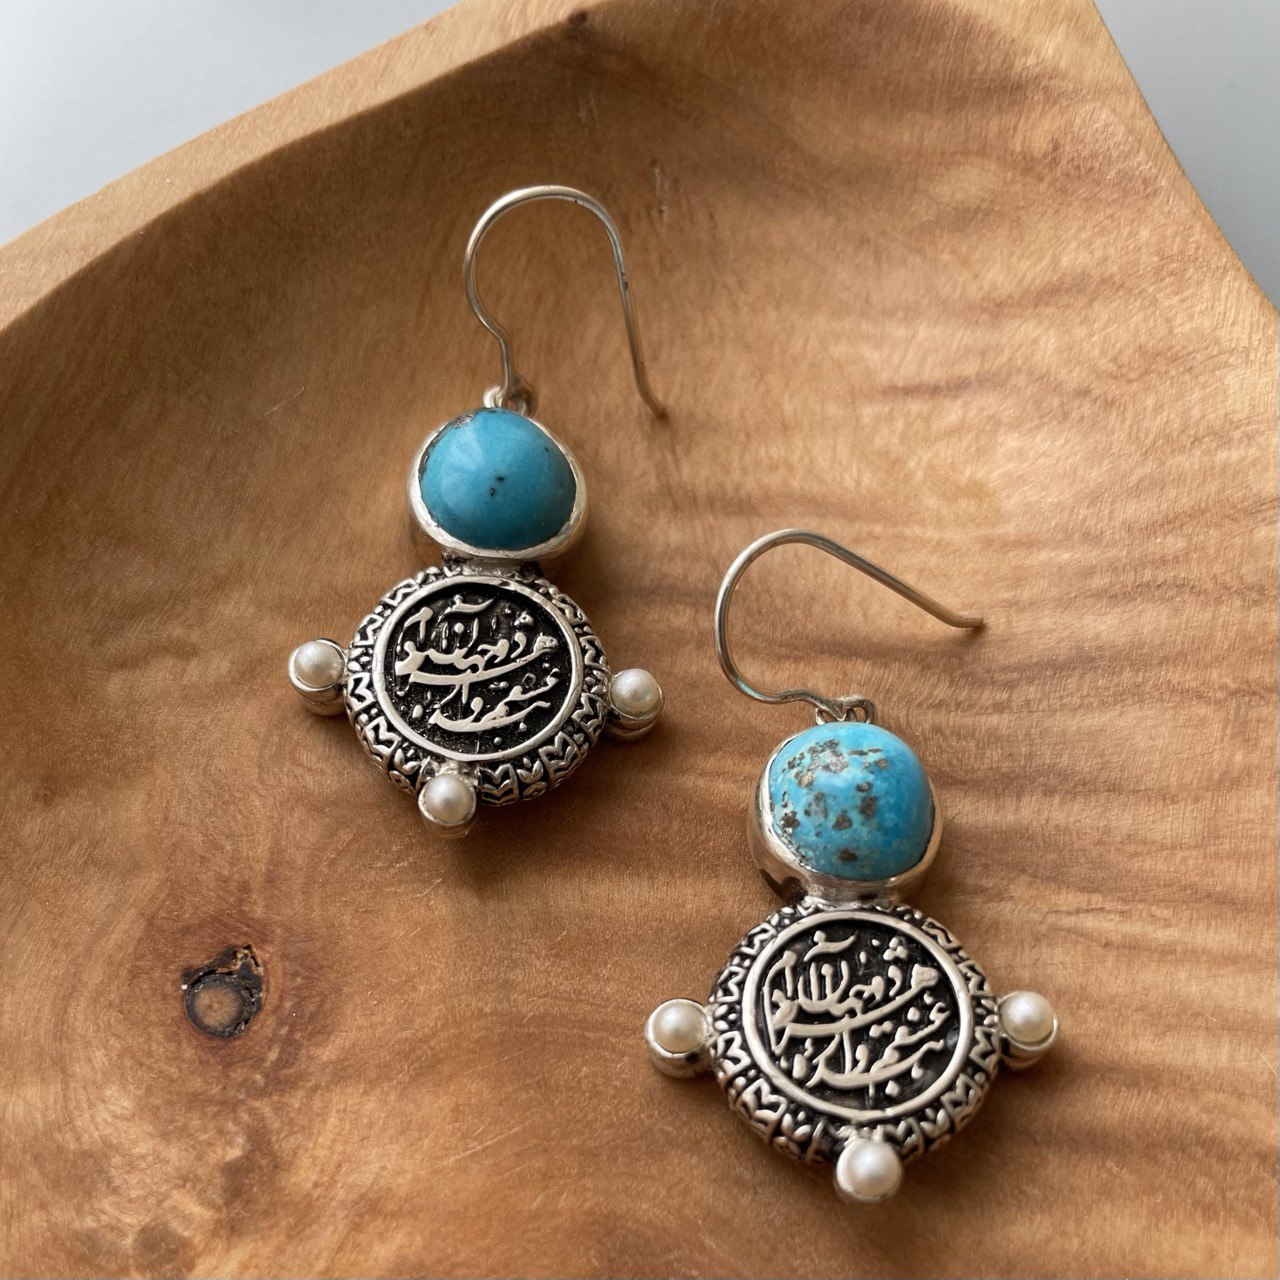 Persian Earrings-Handmade Silver Earrings with Persian Calligraphy and Turquoise: Persian Jewelry-AFRA ART GALLERY